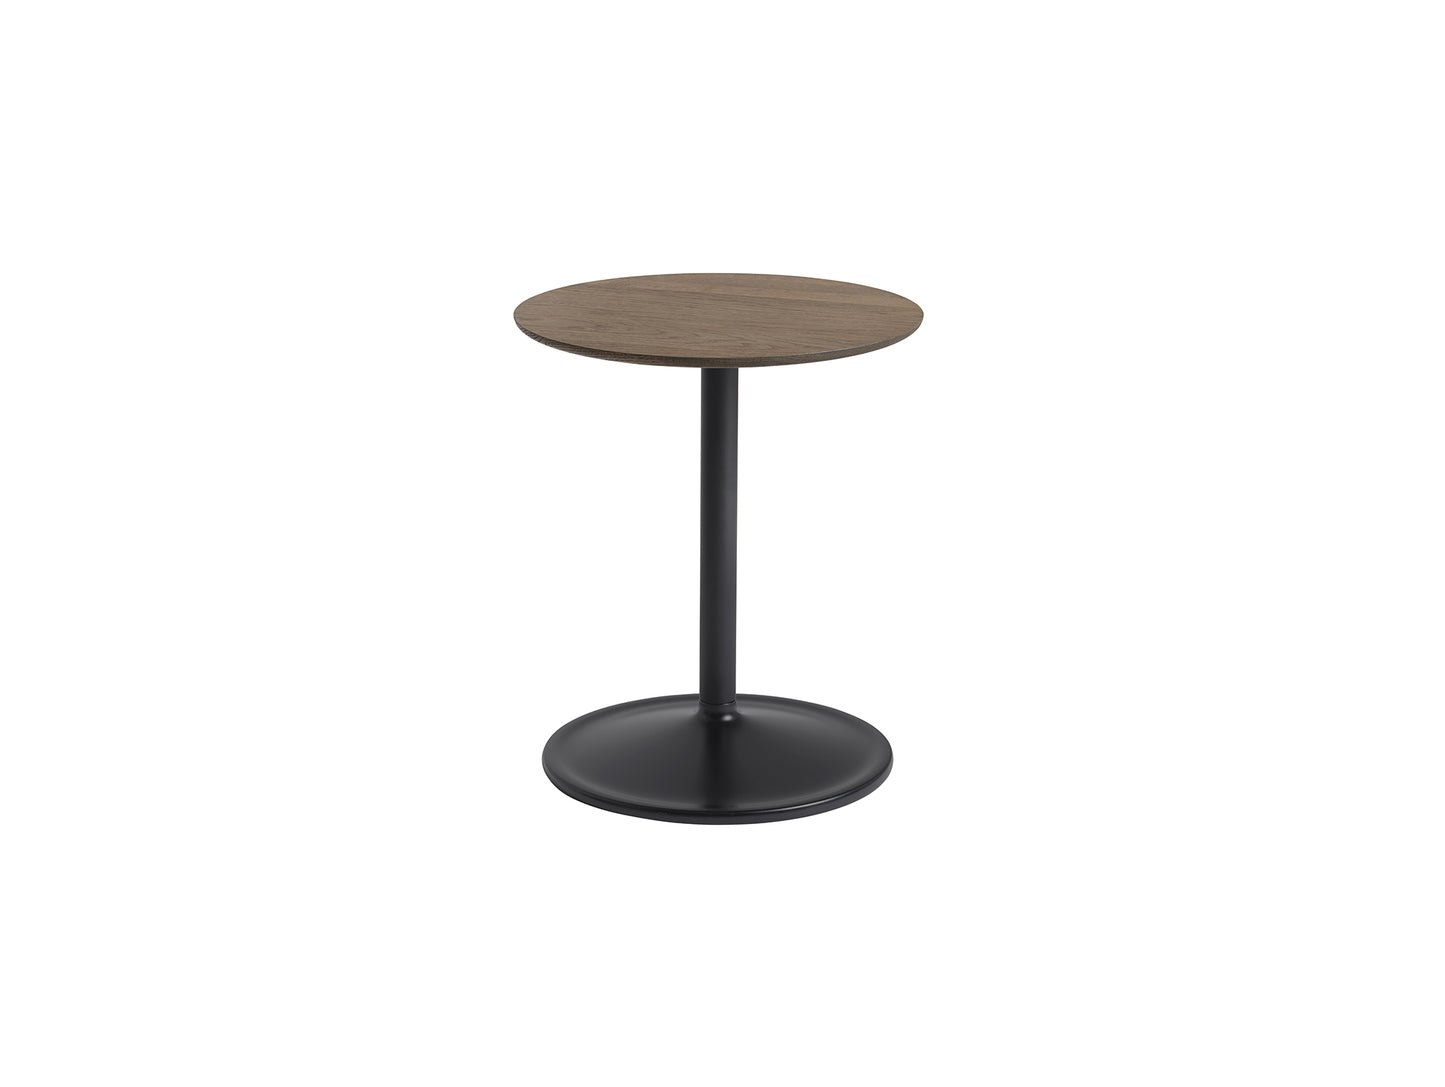 Soft Side Table by Muuto - Diameter : 41 cm / Height: 48cm in solid smoked oak top and black aluminum base